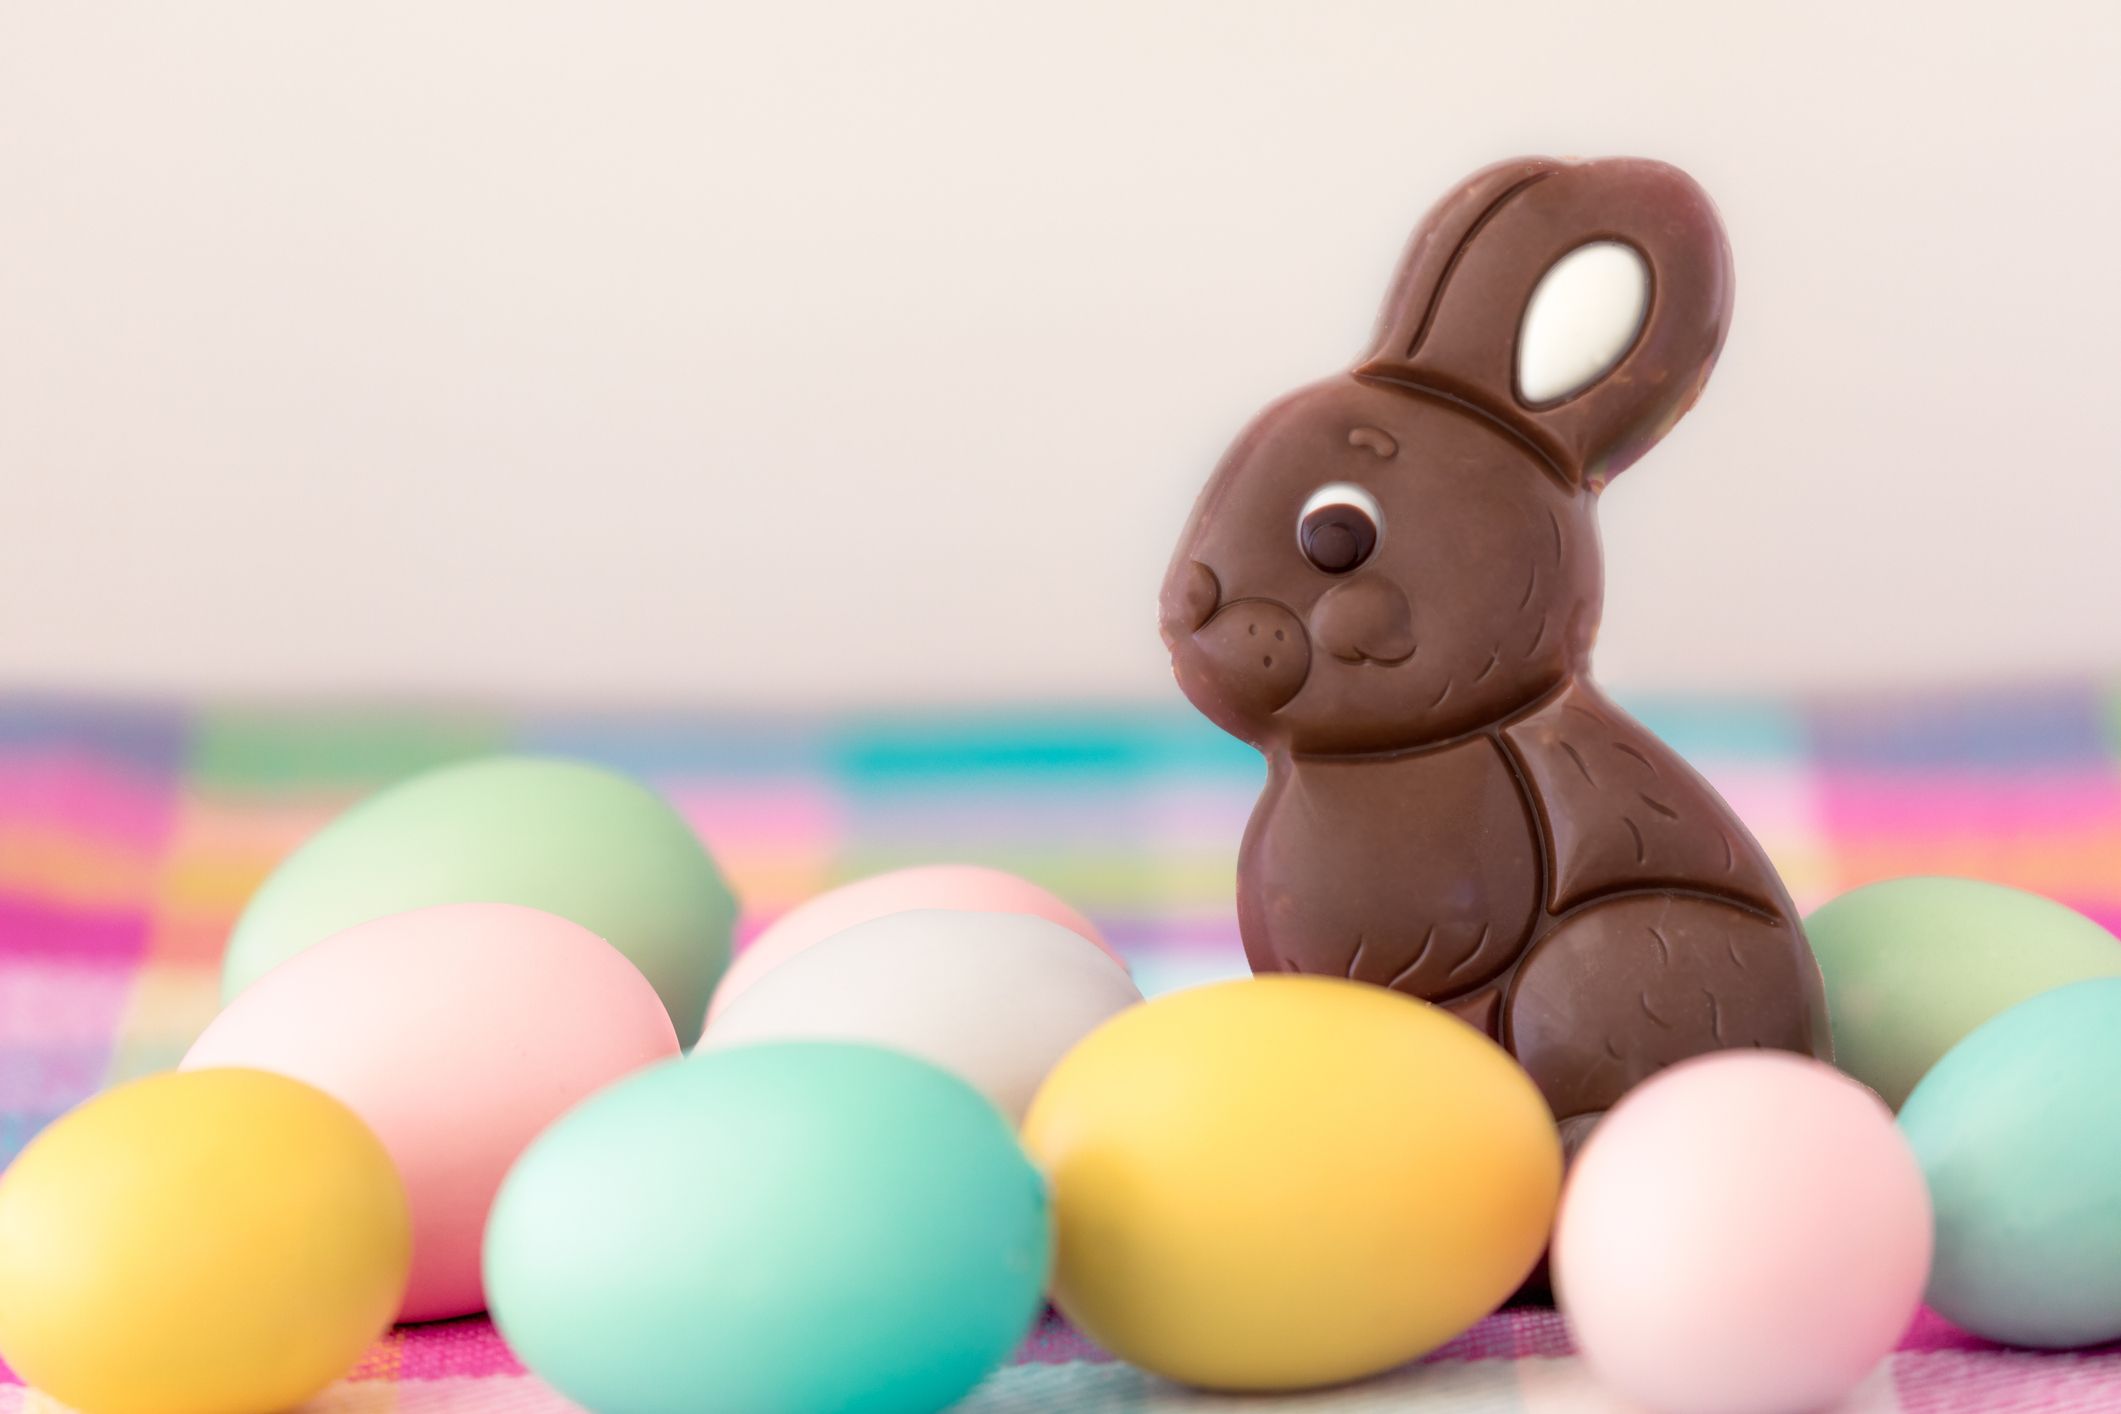 Best Easter Instagram Captions - What to Post on Easter